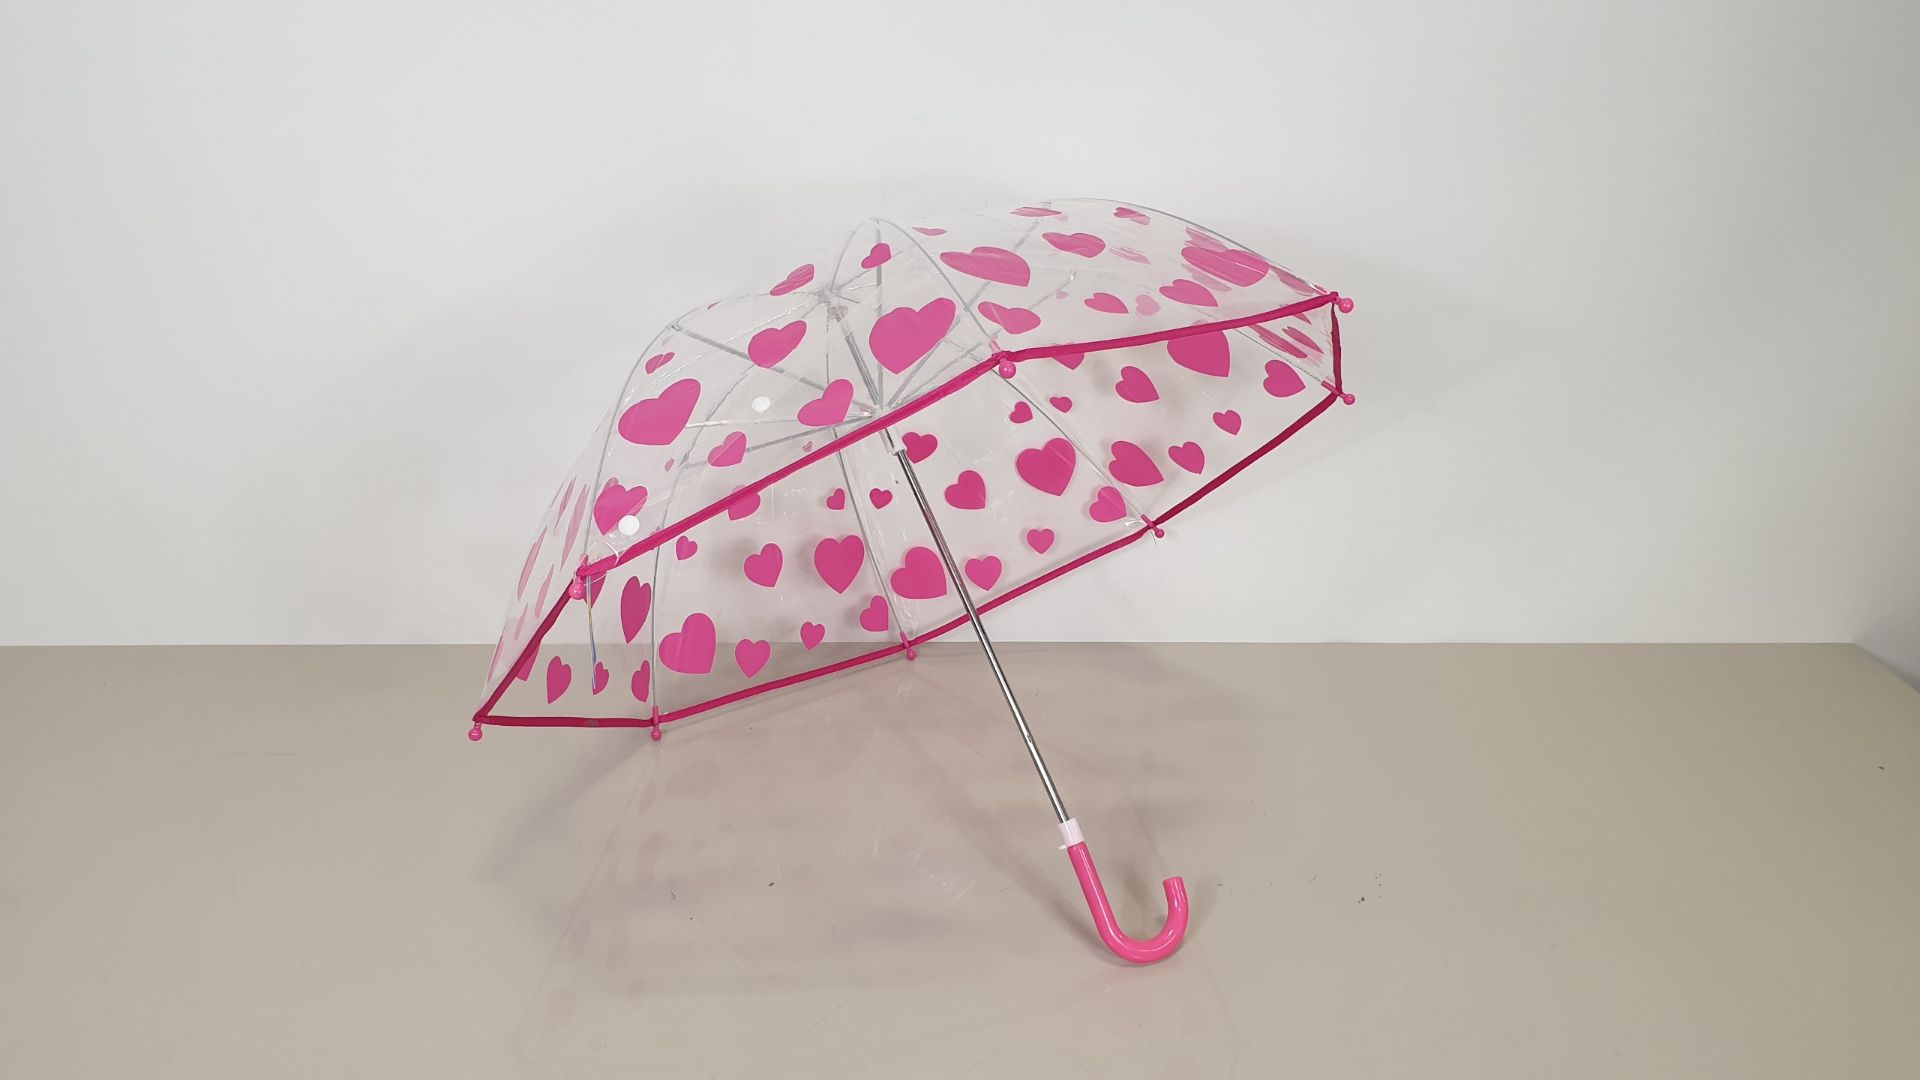 256 X KIDS CLEAR UMBRELLA PRINTED HEARTS - IN 16 BOXES